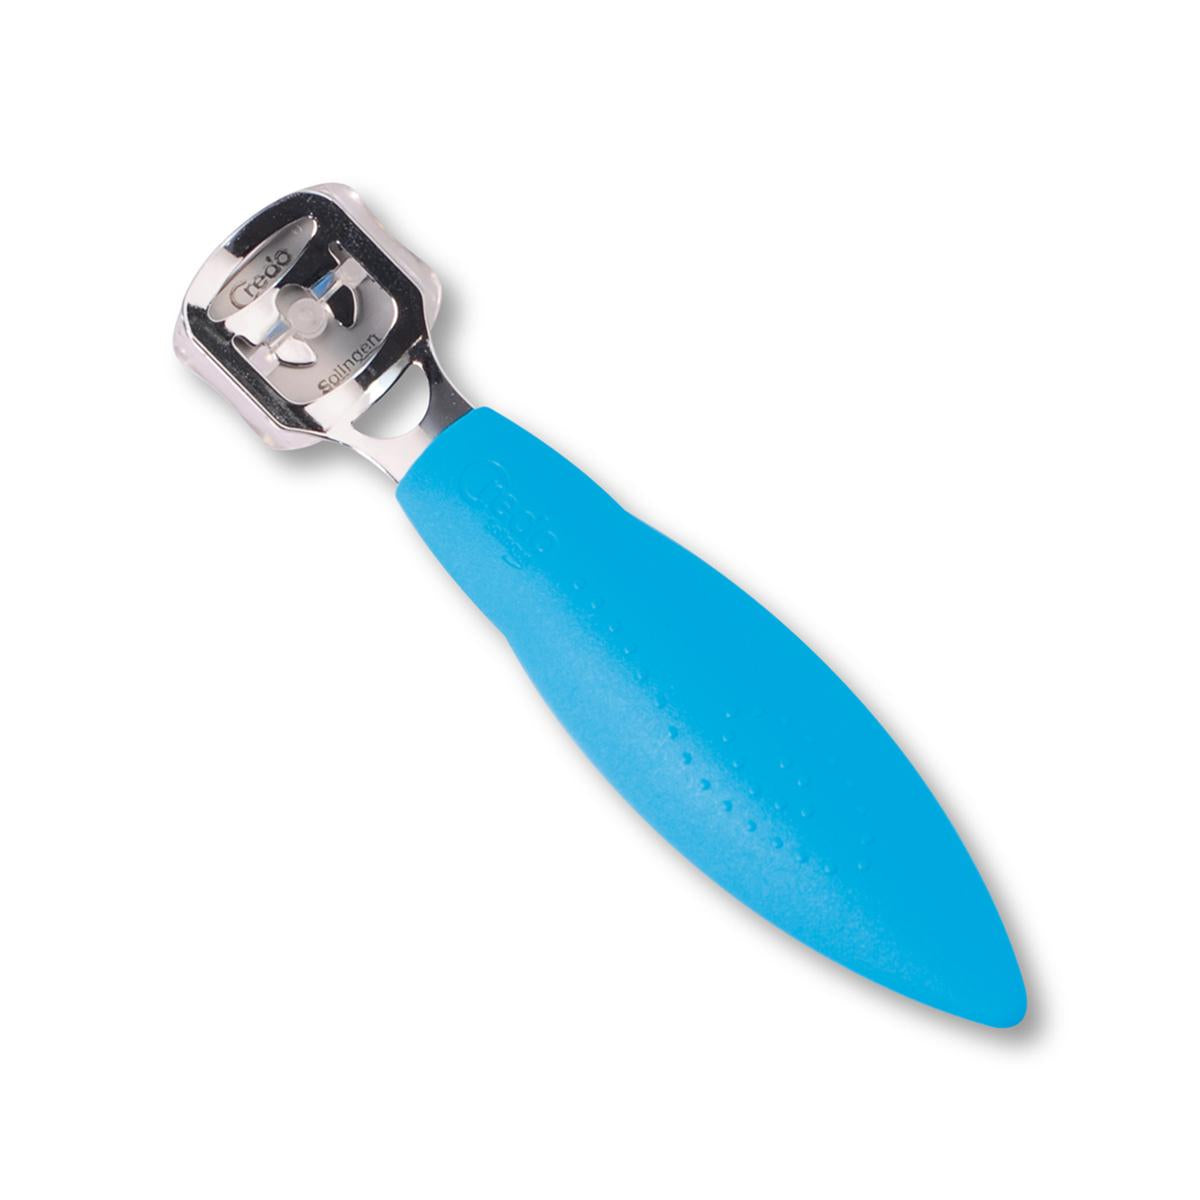 Primary image of Blue Pop Art Safety Corn Cutter